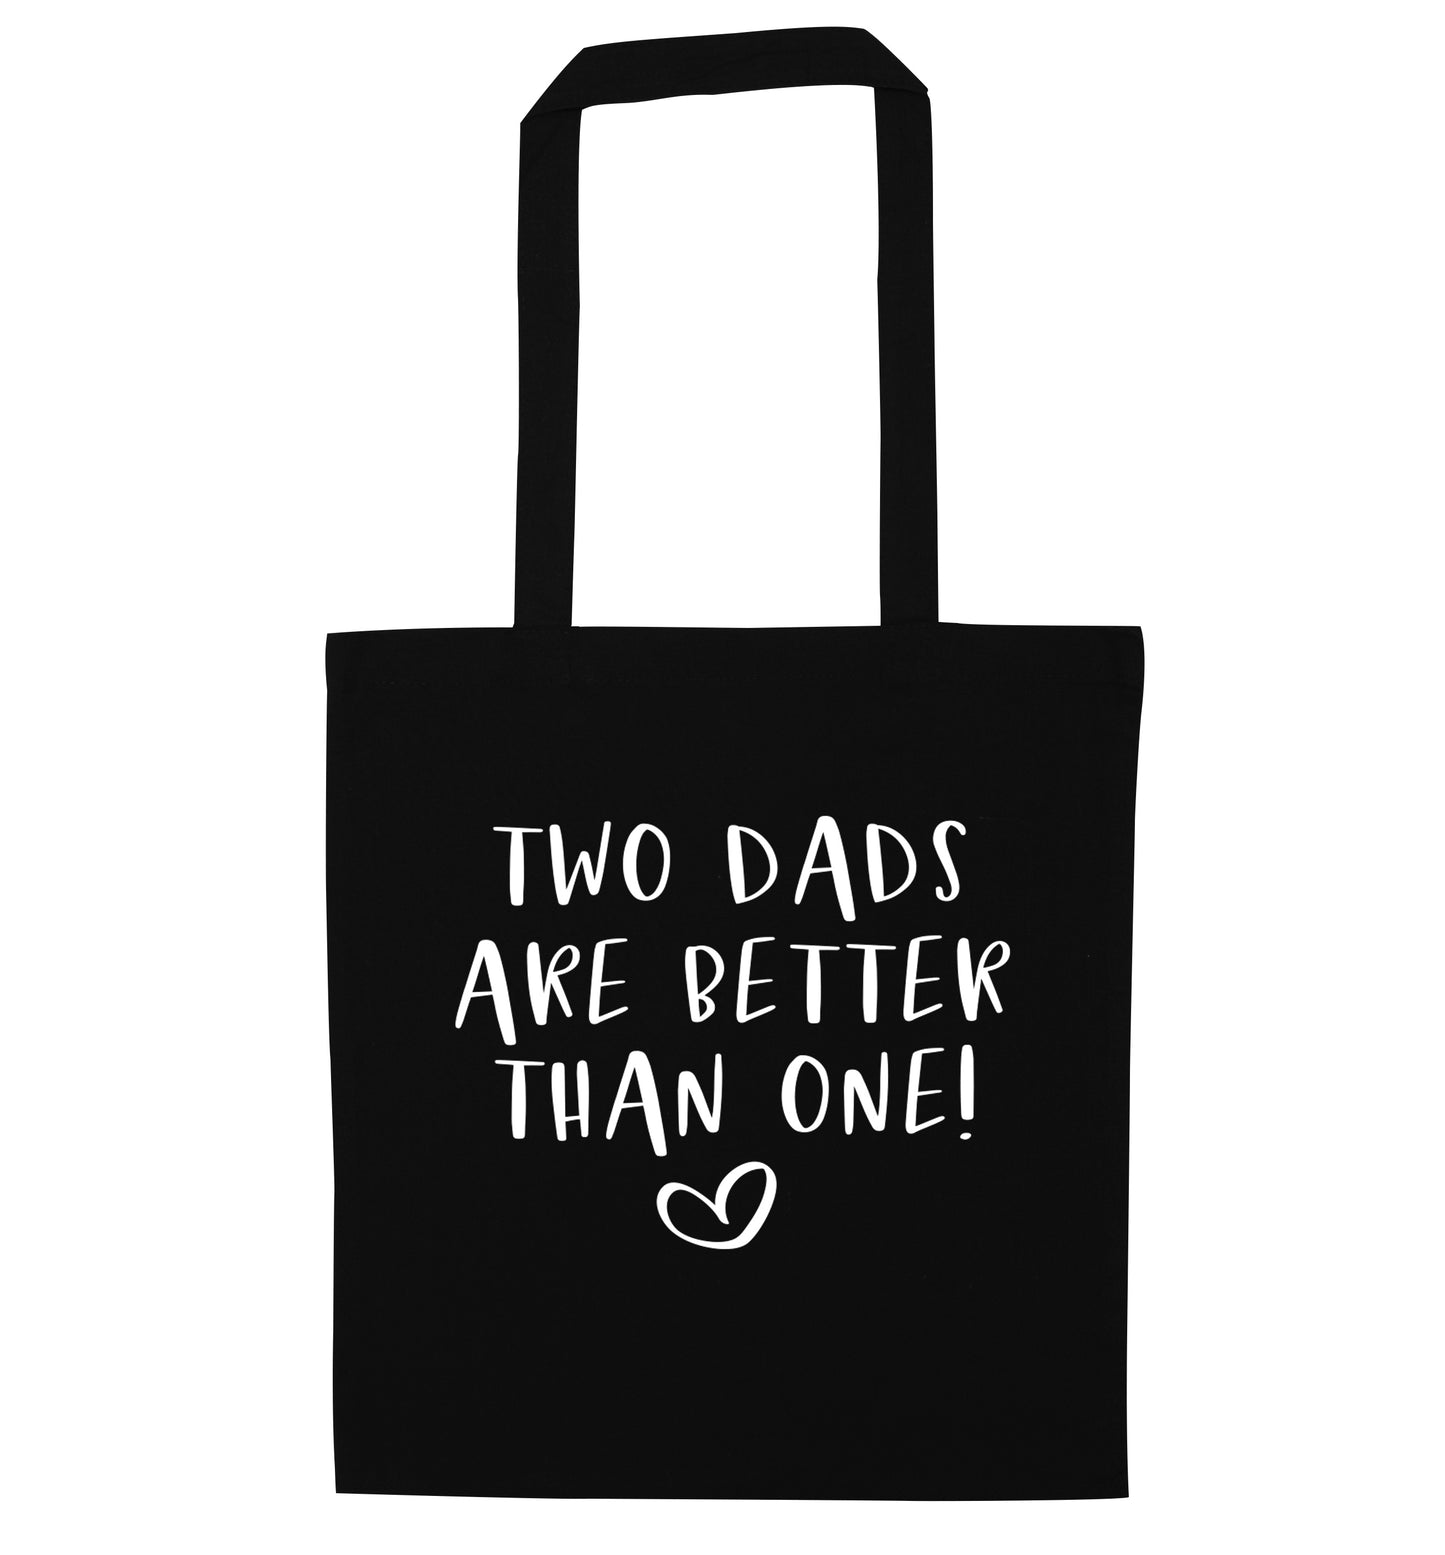 Two dads are better than one black tote bag